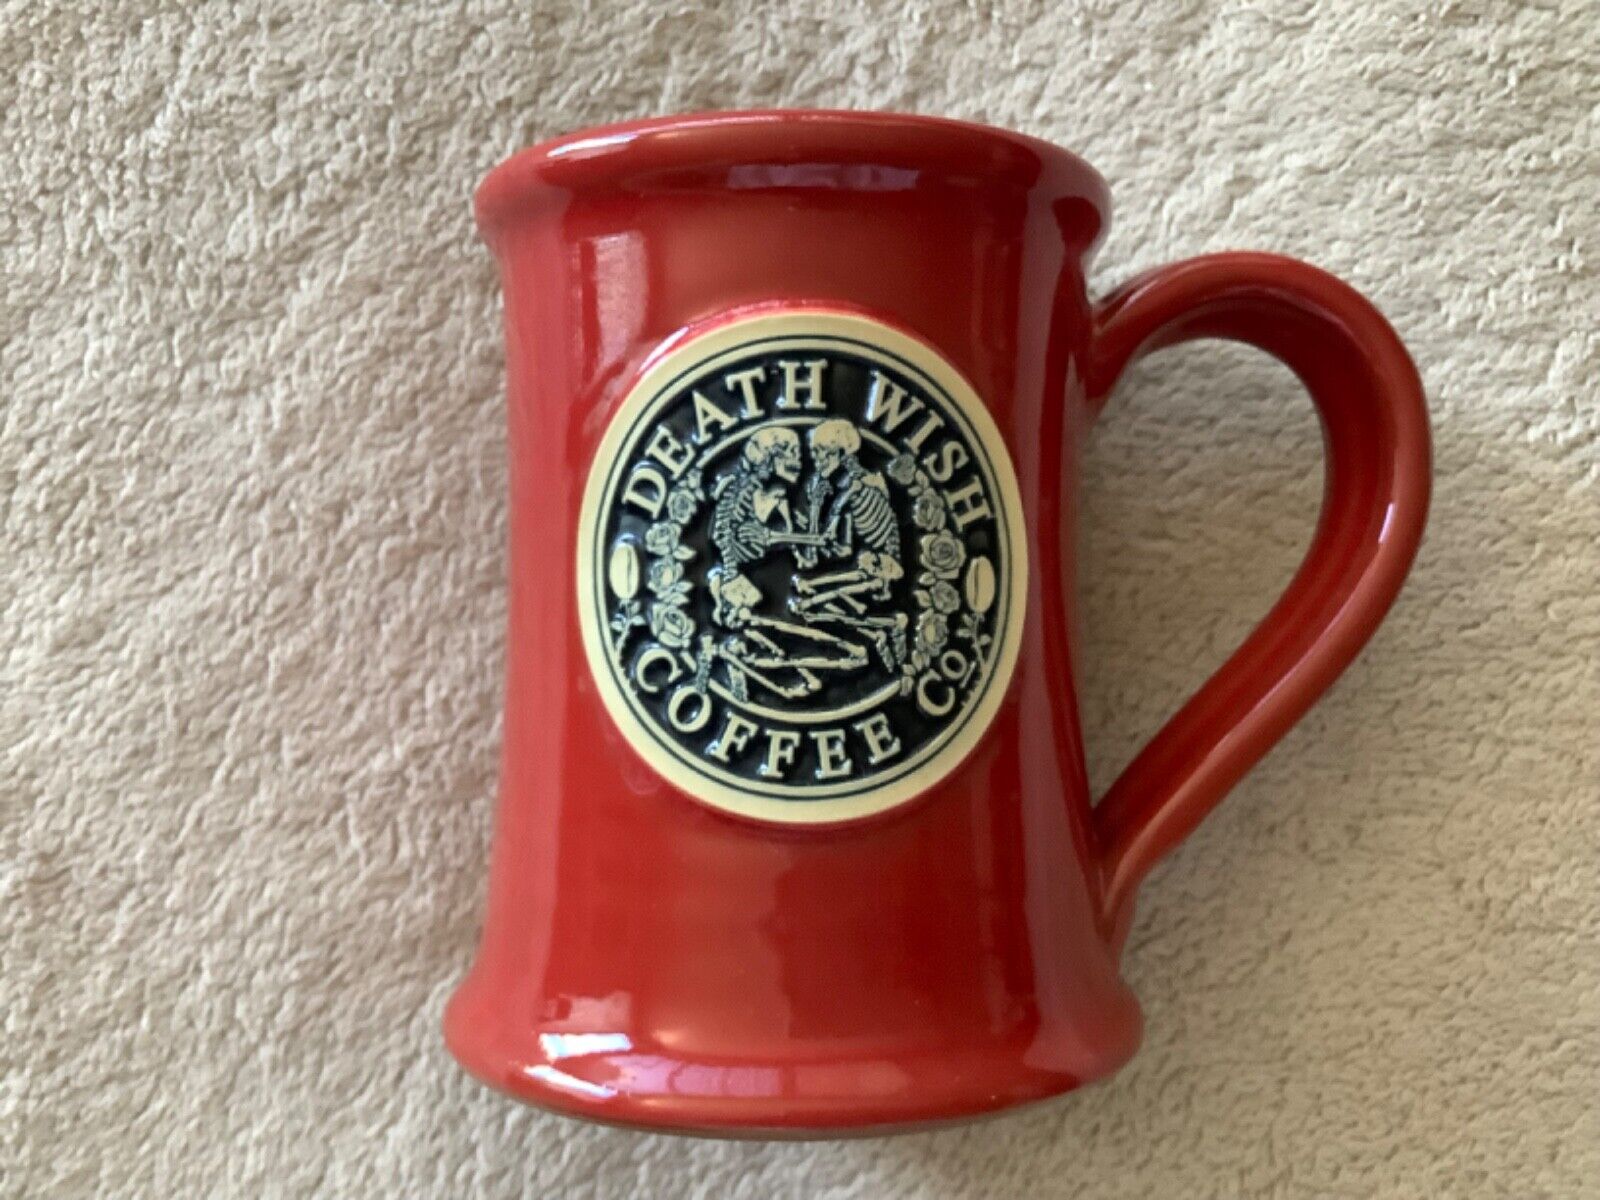 death wish coffee eternal embrace valentines day mug deneen pottery limited rare